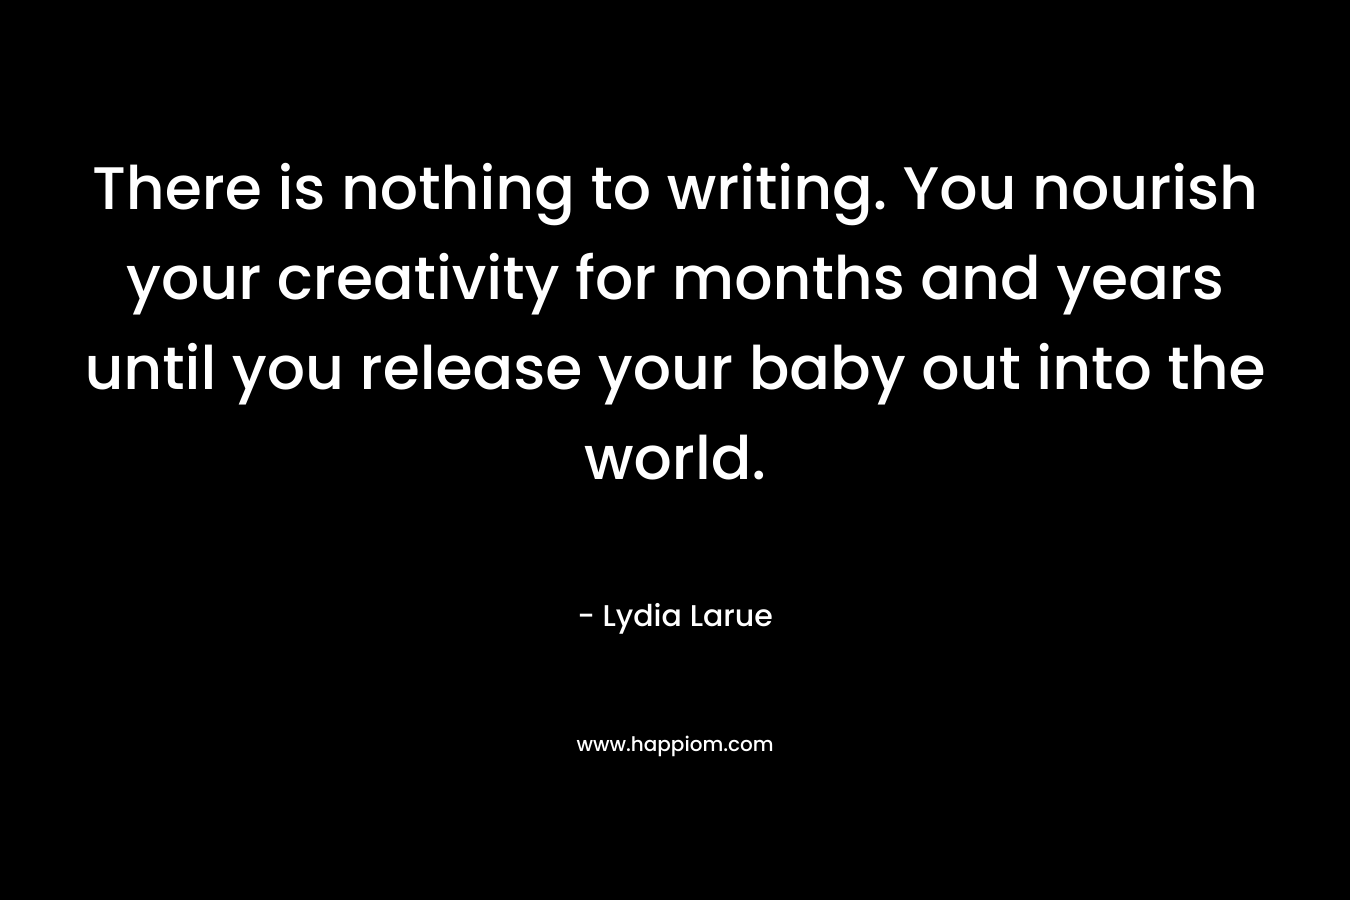 There is nothing to writing. You nourish your creativity for months and years until you release your baby out into the world. – Lydia Larue